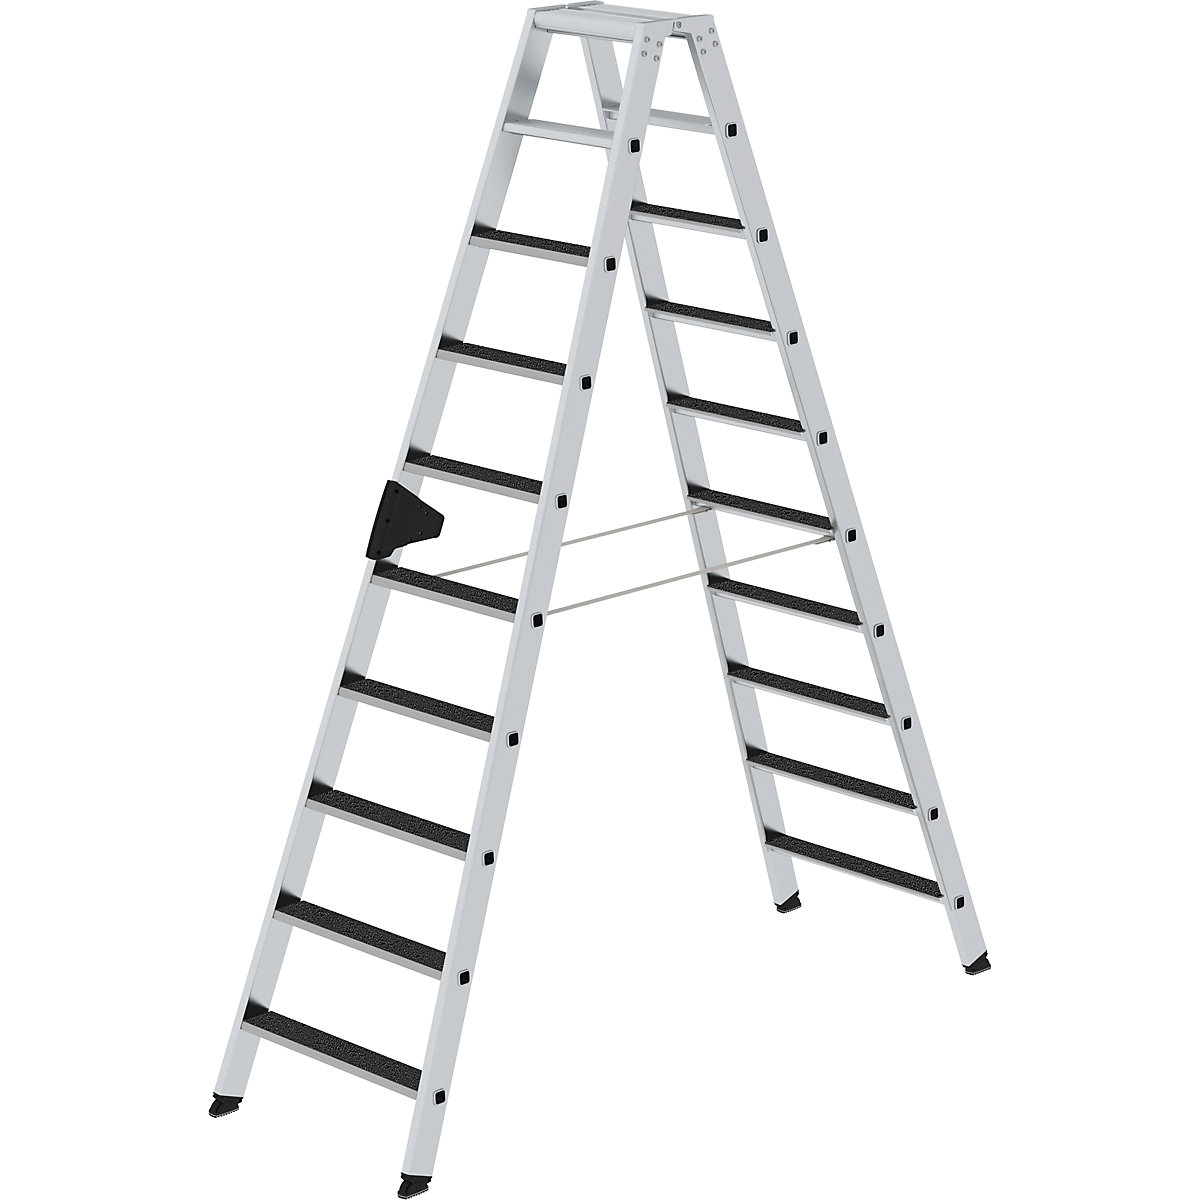 CLIP-STEP step ladder – MUNK, double sided access, slip resistant R13, 2 x 10 steps-7